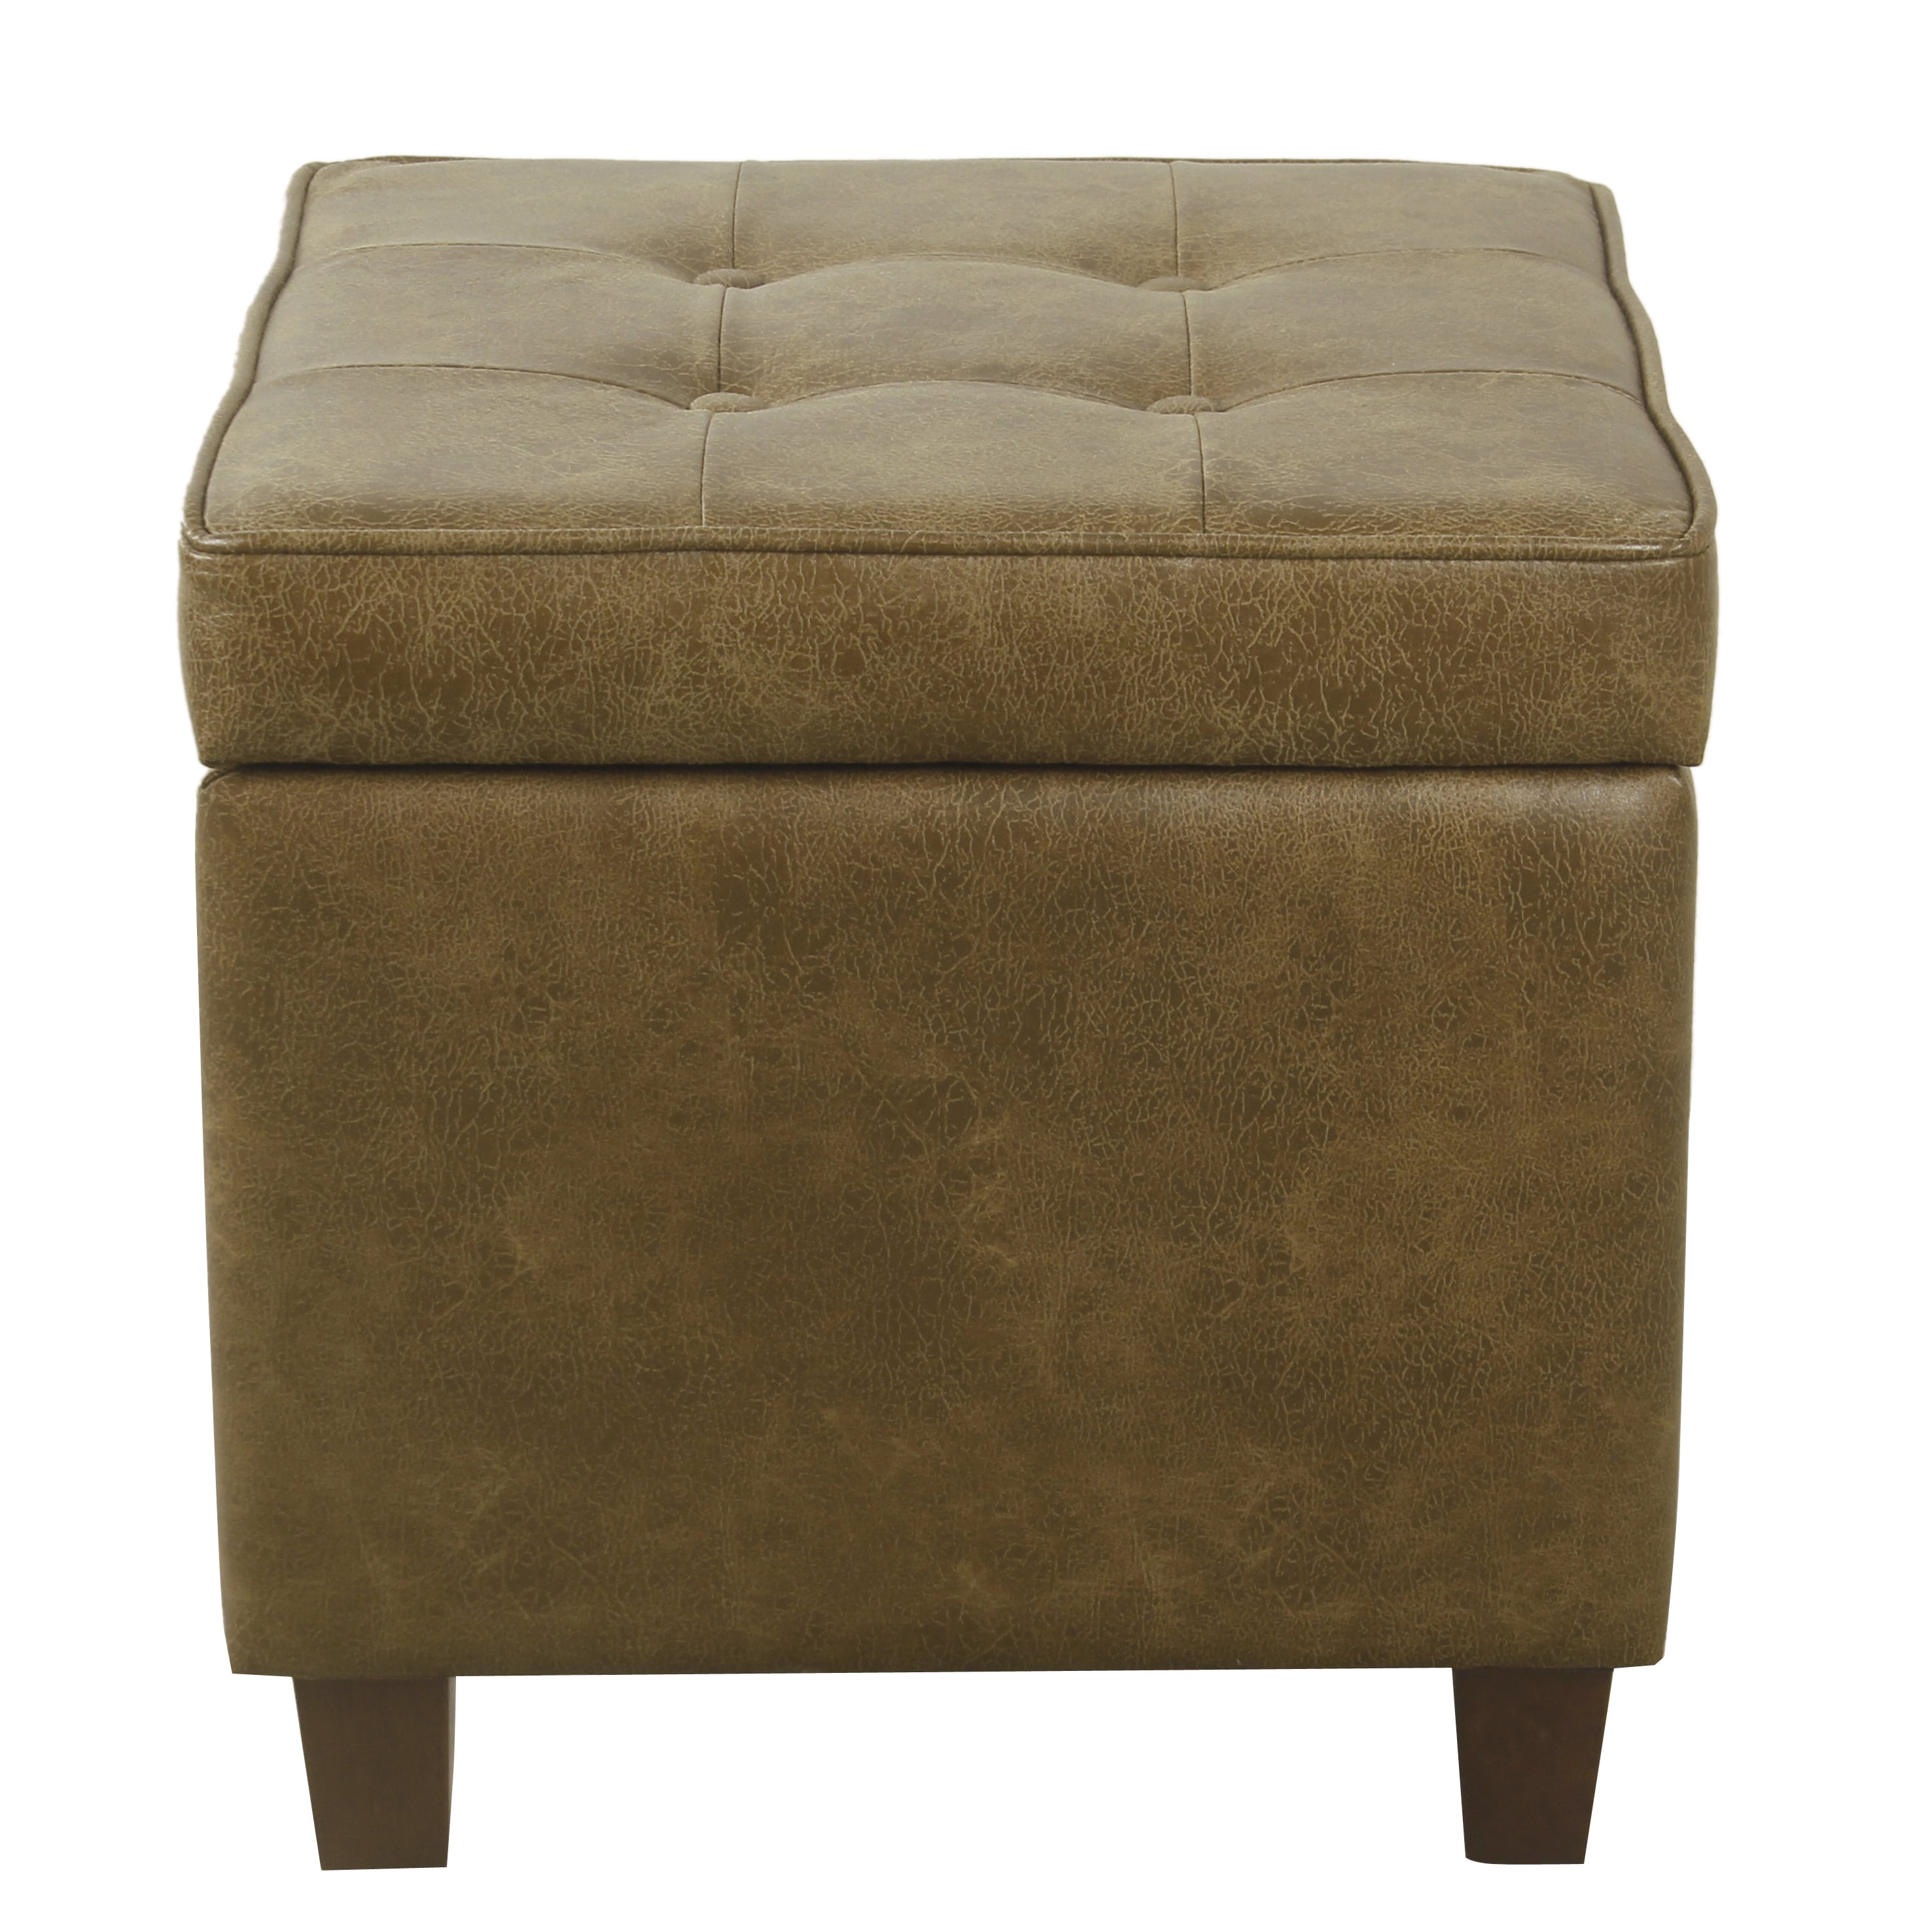 Homepop Square Tufted Storage Ottoman, Square Brown Leather Ottoman With Storage